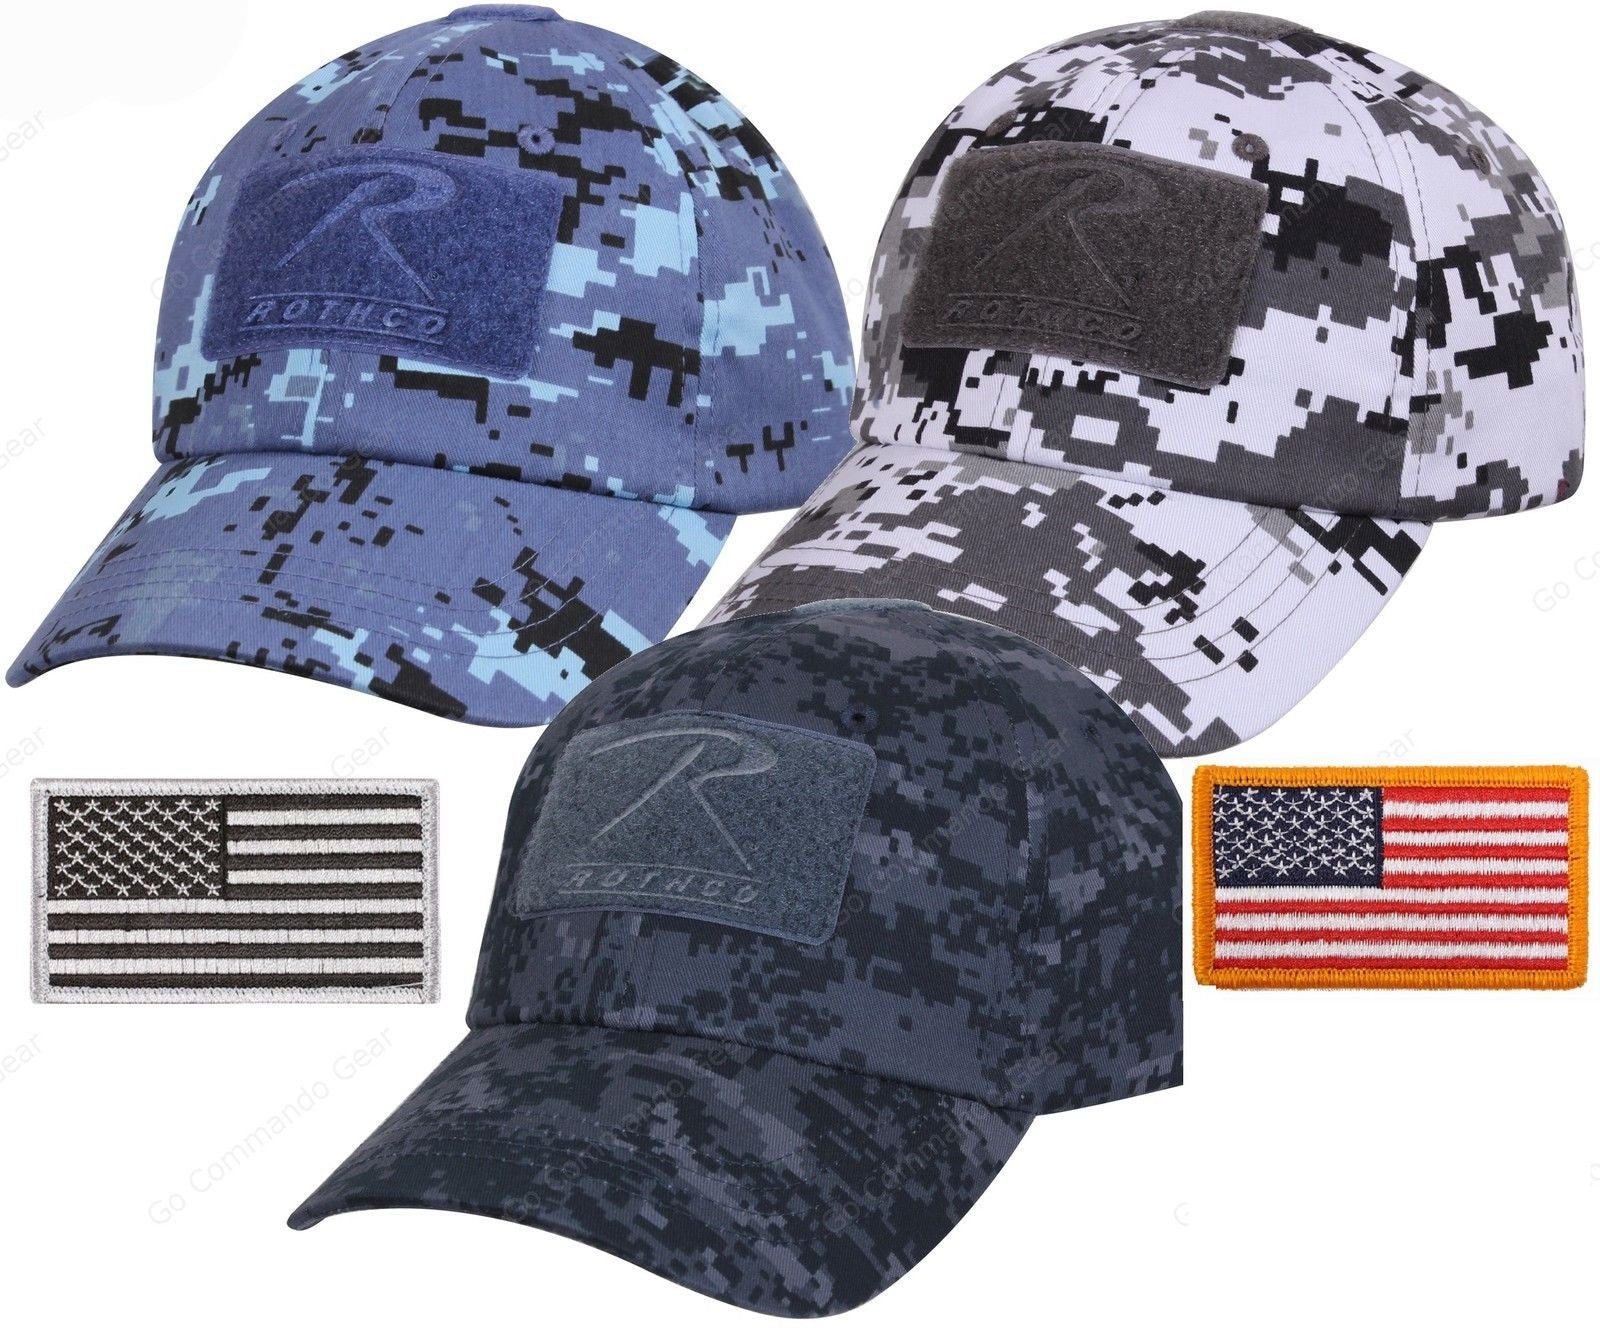 Mens Digital Camouflage Tactical Cap & USA Flag Patch - Rothco